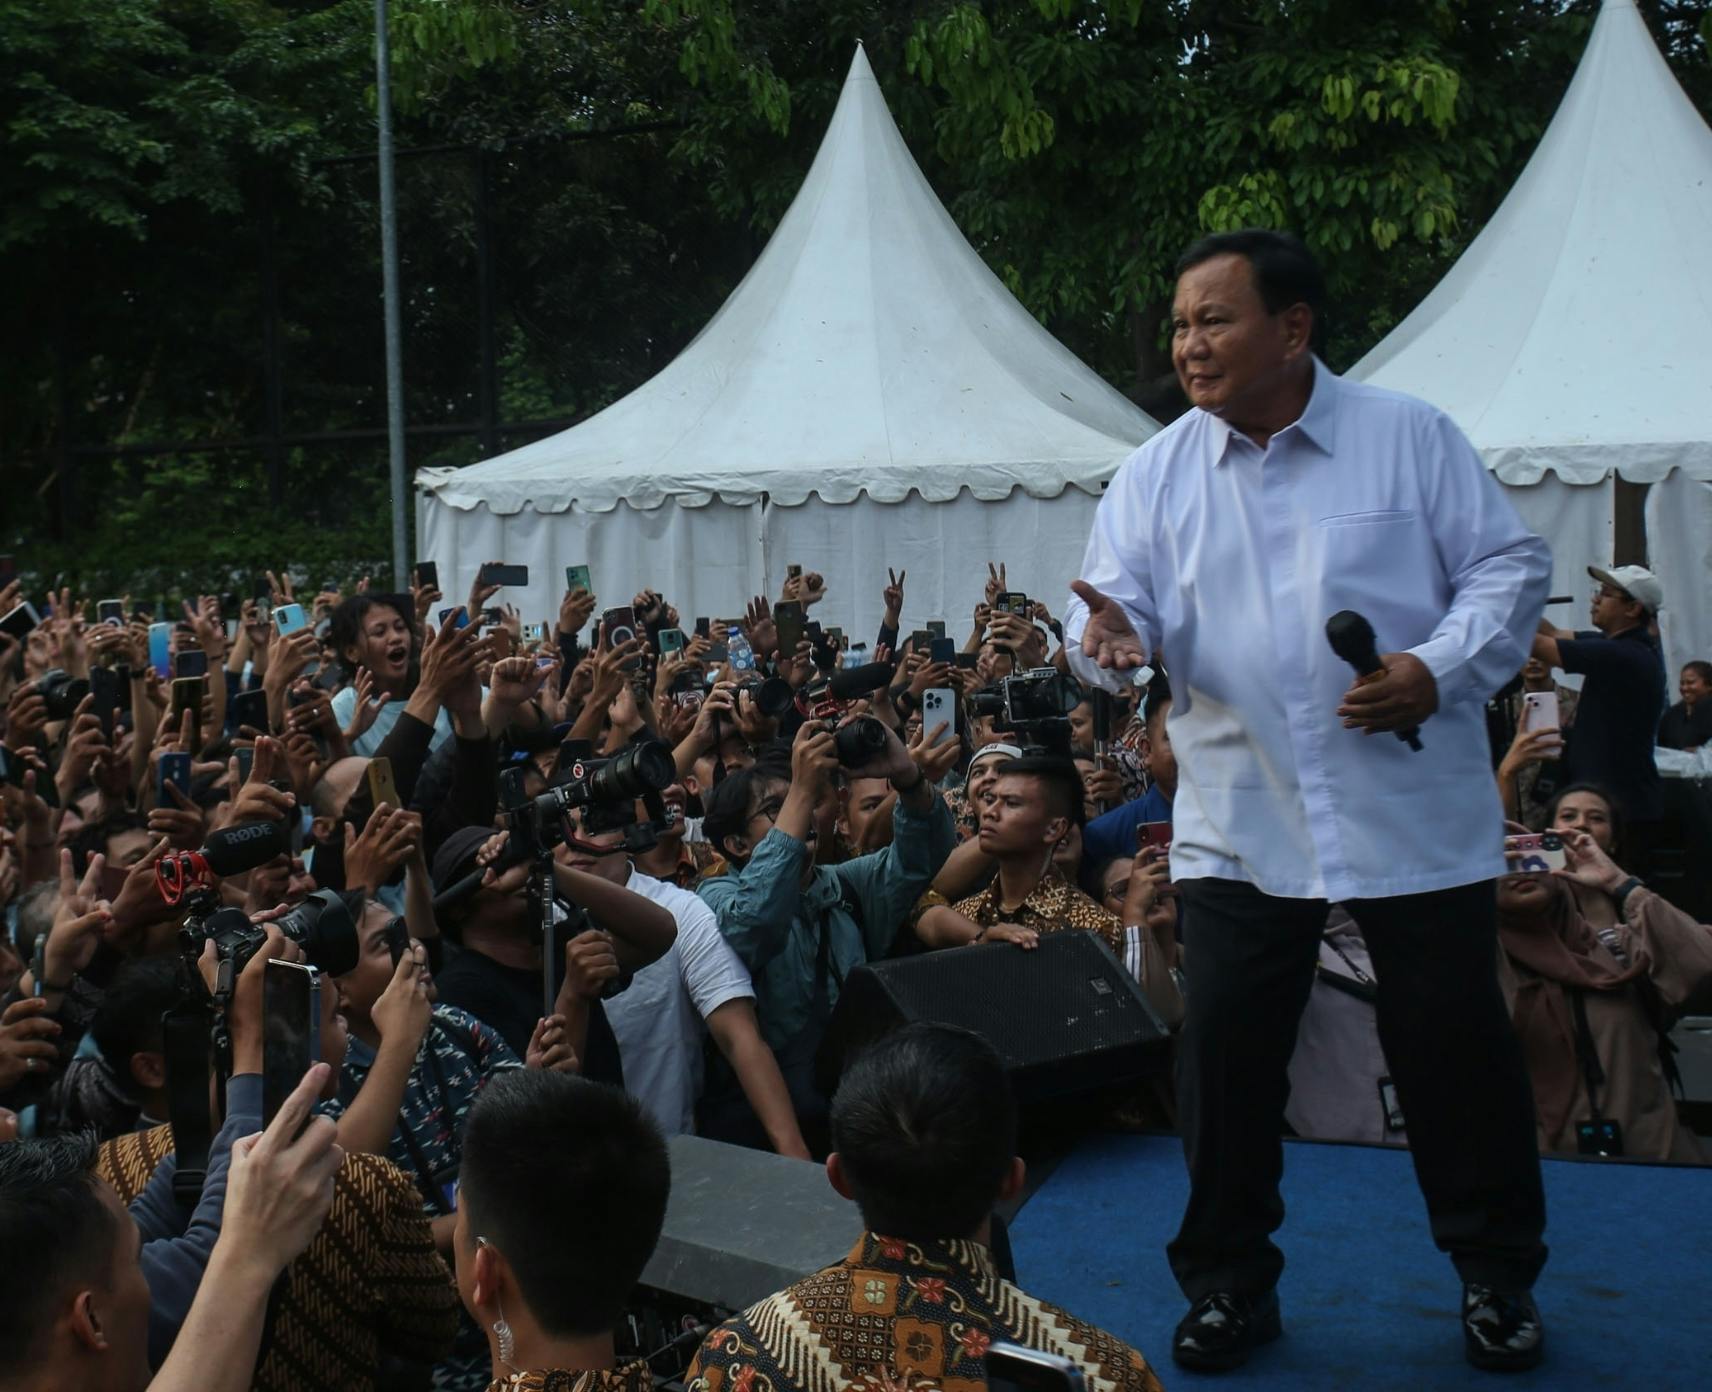 Did Prabowo Subianto’s TikTok makeover impact the Indonesian election results? article image